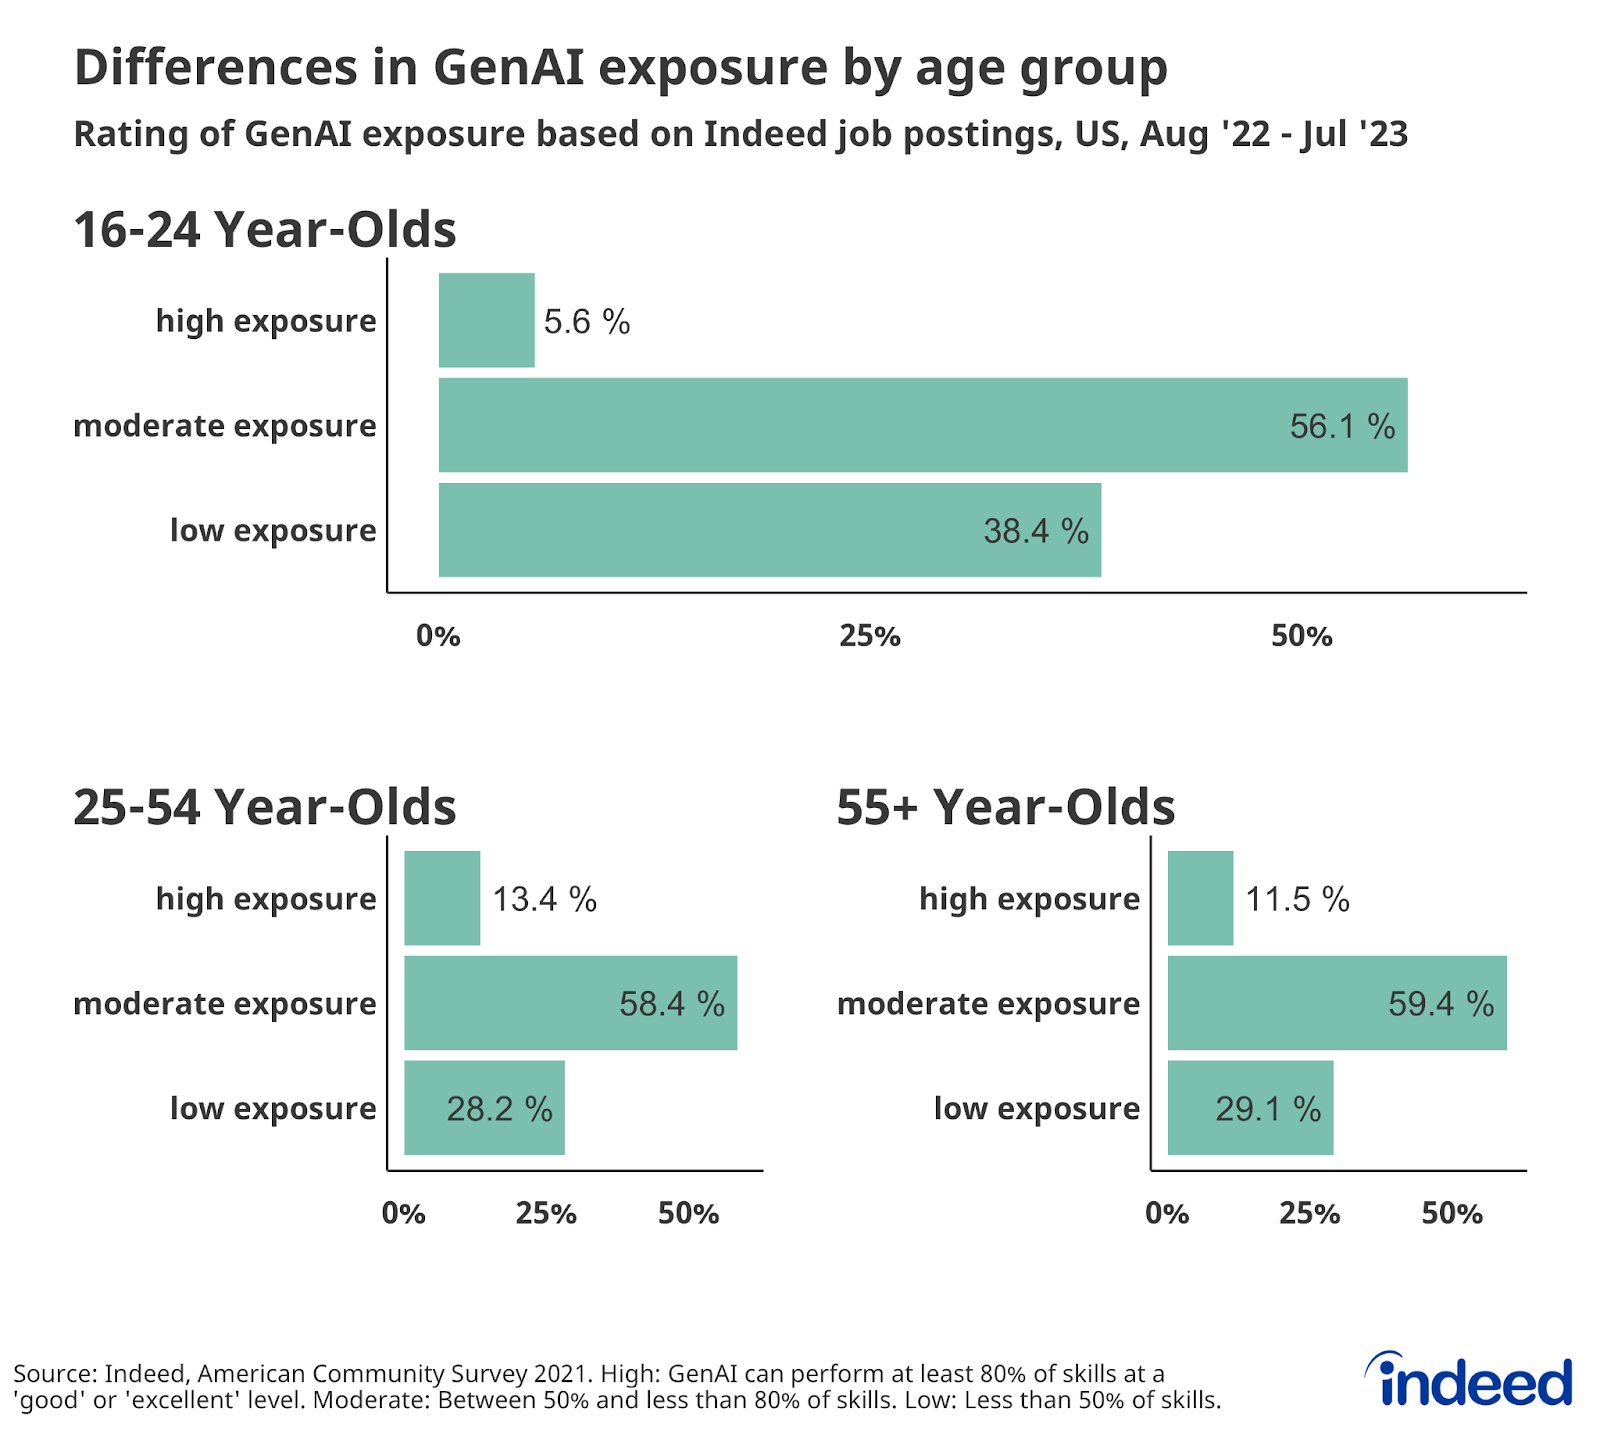 A series of bar graphs titled "Differences in GenAI exposure by age group," shows the rate of GenAI exposure on 16-24-year-olds, 25-54-year-olds, and those over 55 years old. The 25-54 age bracket had the highest percentage of high exposure at 13.4%, while the 16-24 age bracket rated only 5.6% for high exposure.